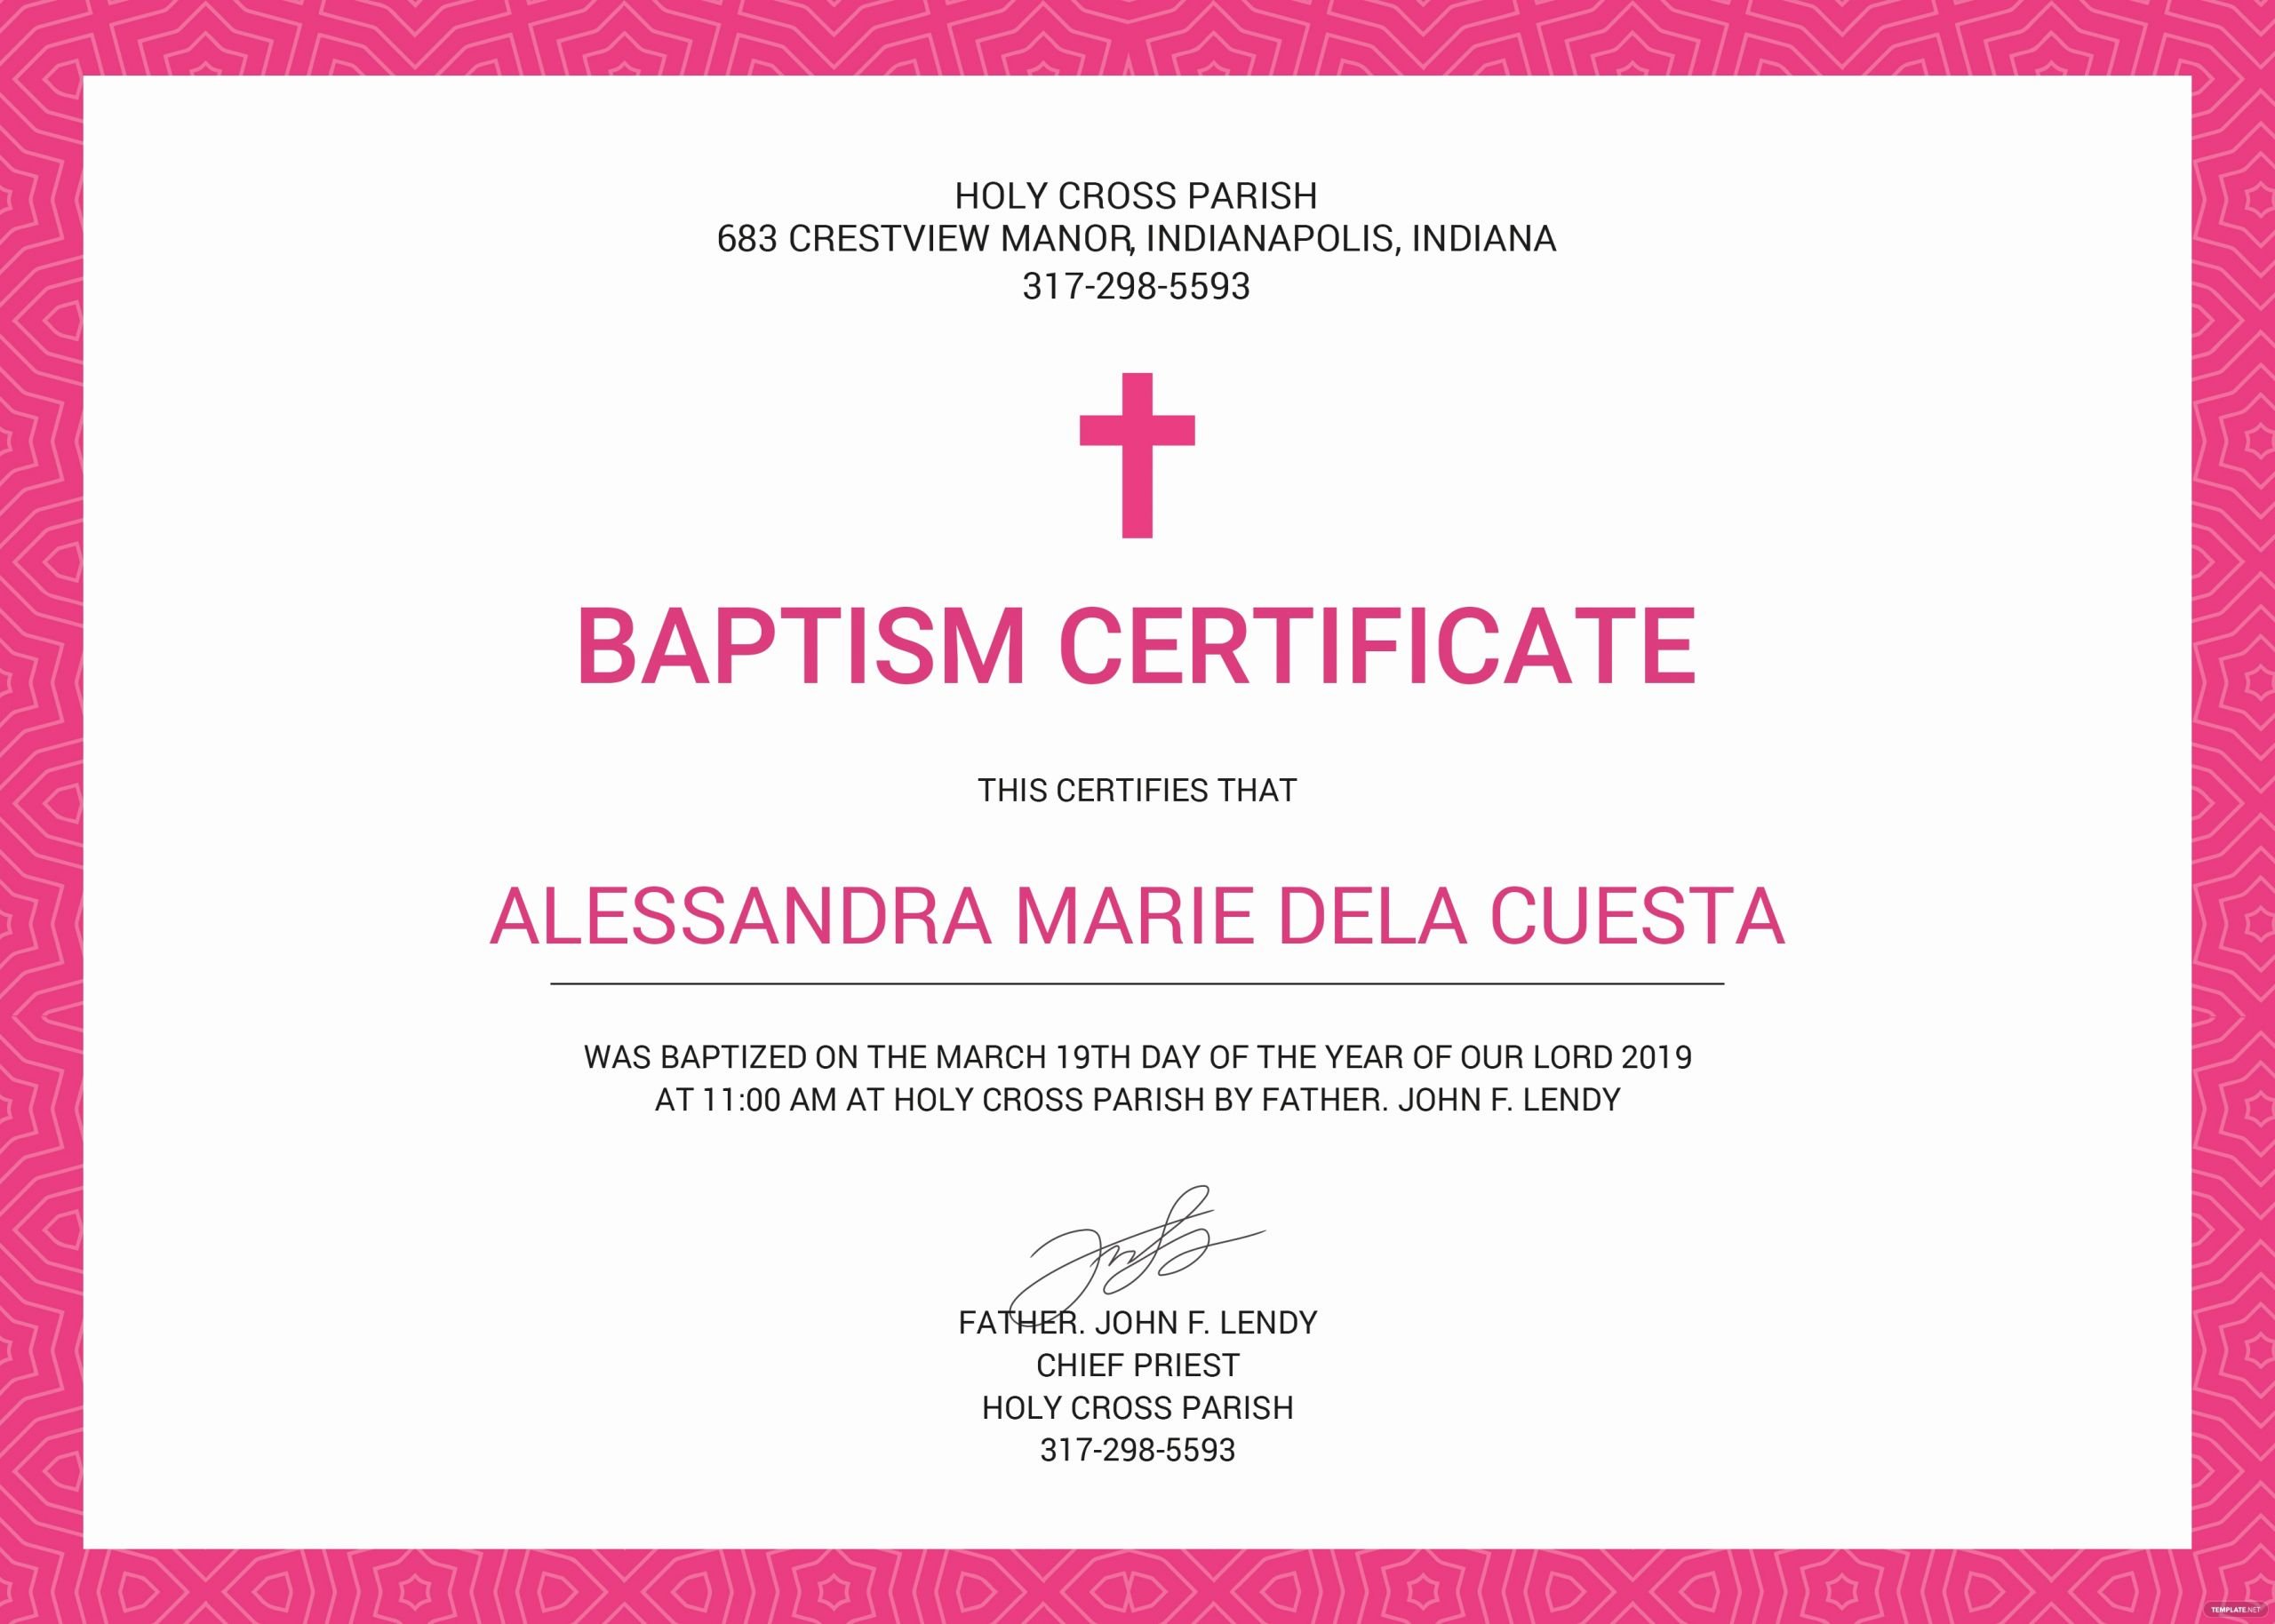 Baptism Certificate Template Publisher Awesome Free Baptism Certificate Template In Psd Ms Word